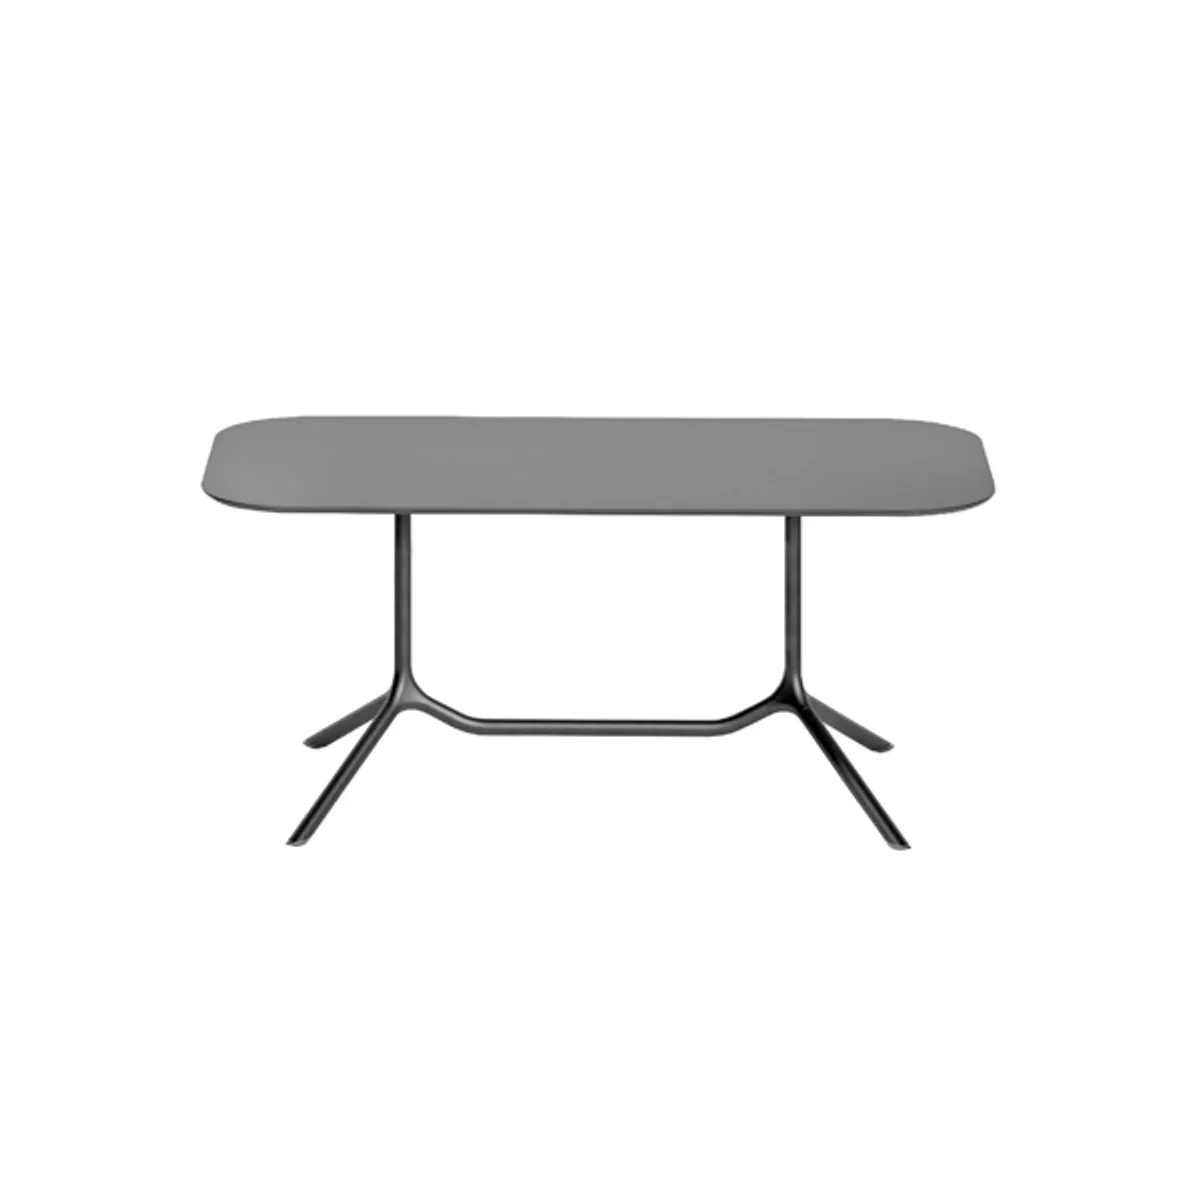 Trinette double table Inside Out Contracts2